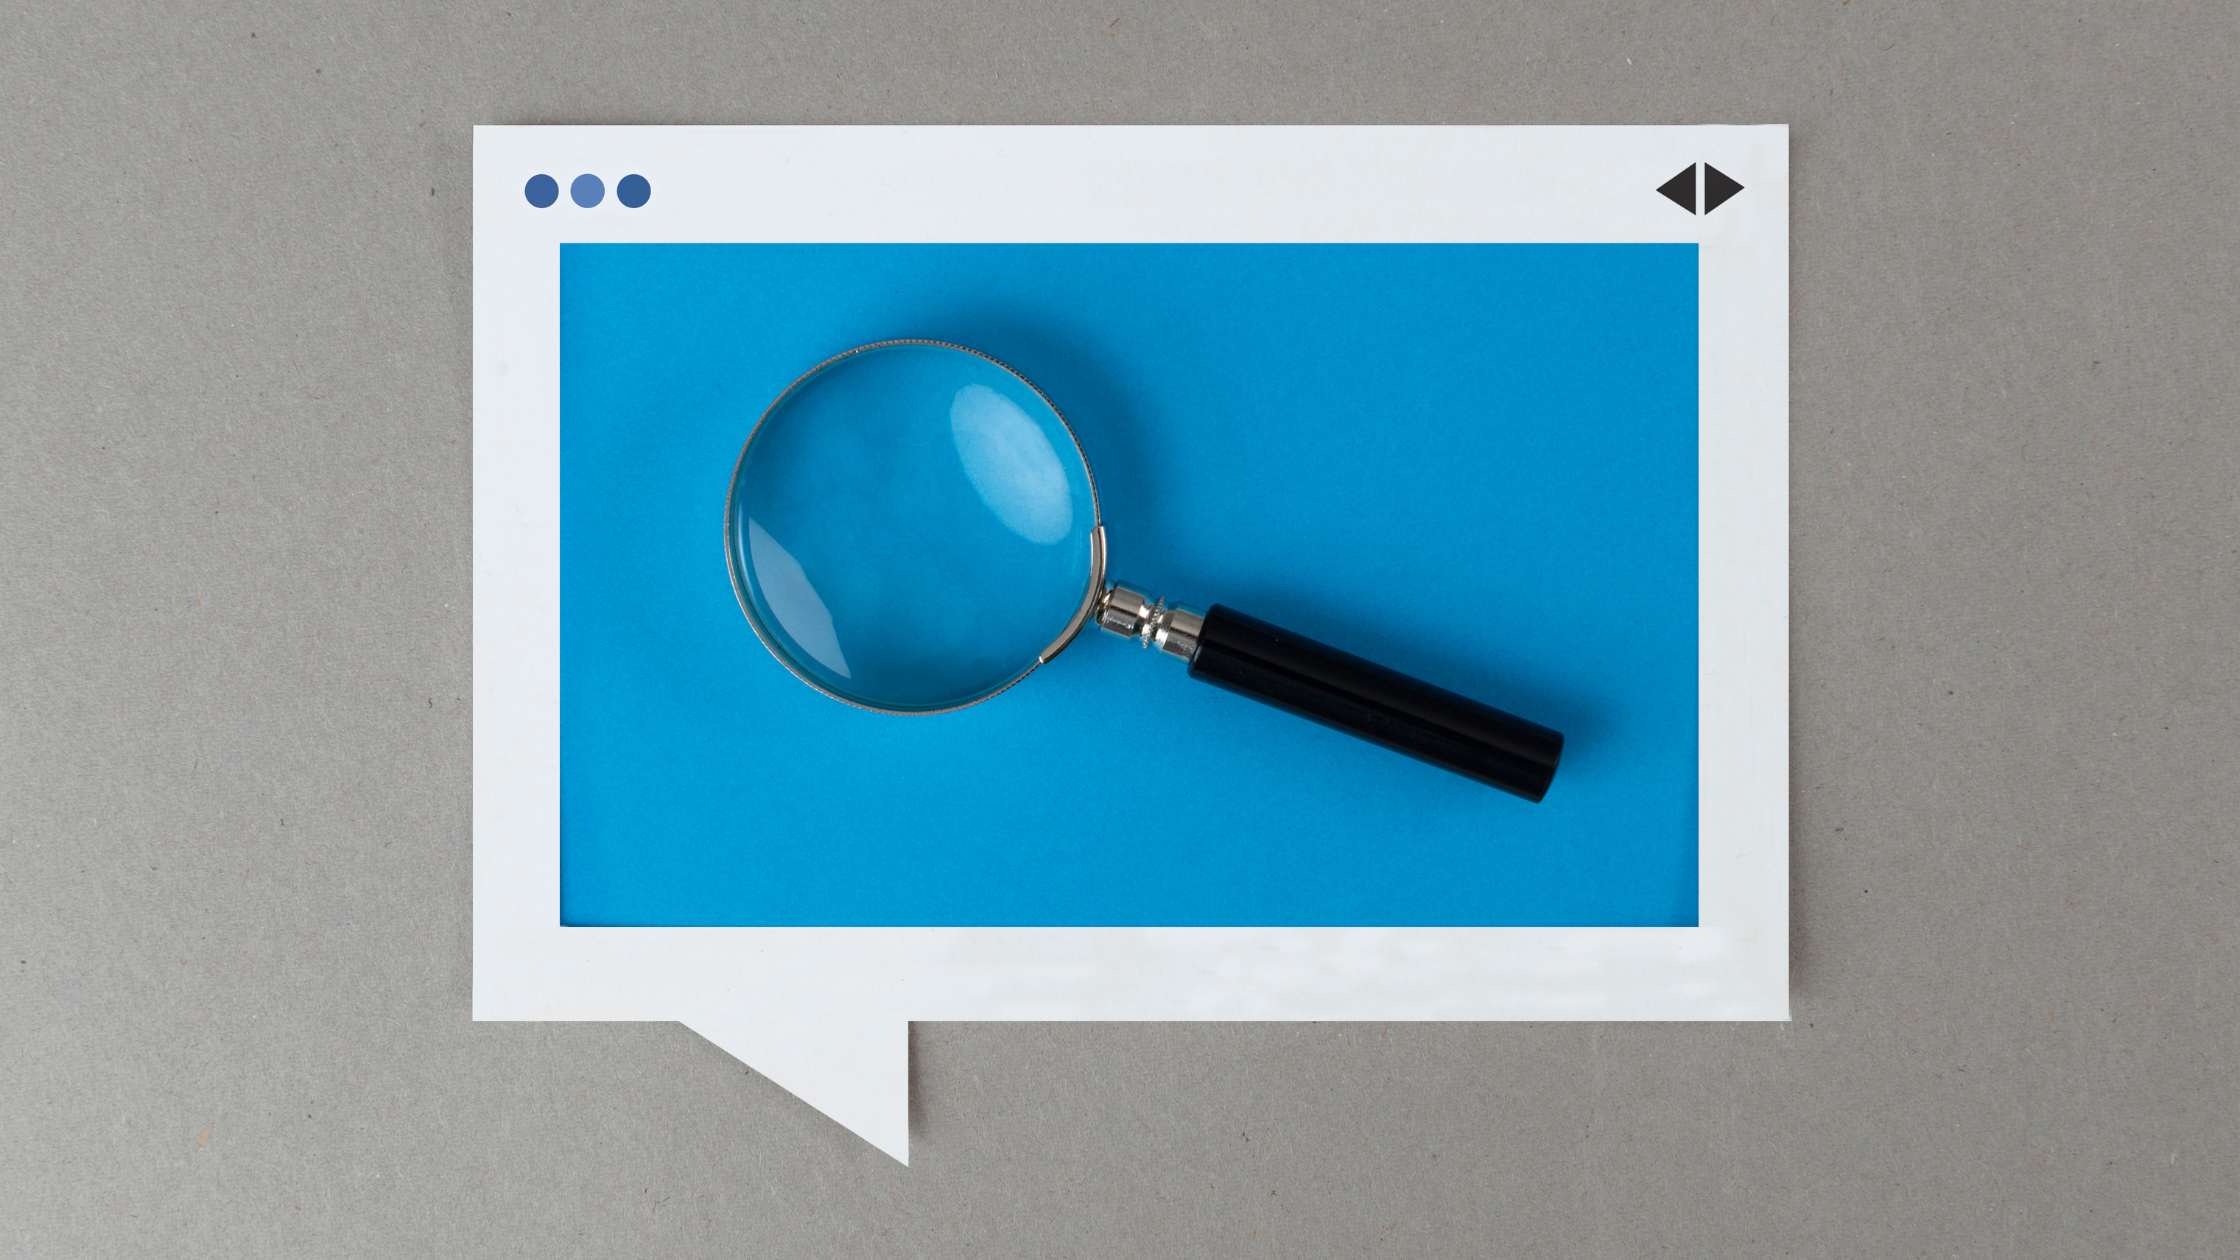 Graphic showing a search engine inside a screen.